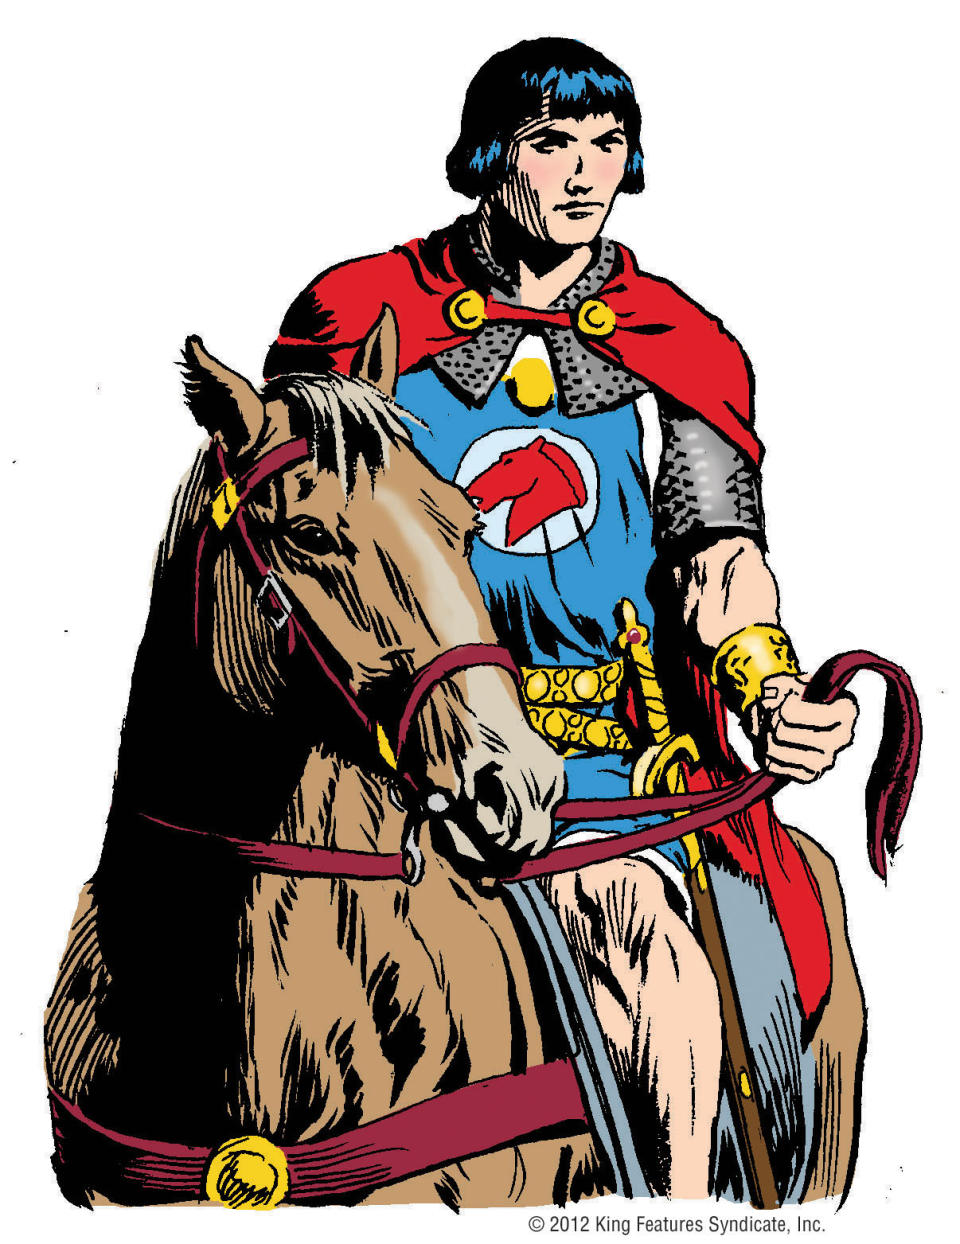 In this publicity photo provided by King Features Syndicate, artist Thomas Yeates' drawing of "Prince Valiant" is shown. The 75th anniversary of the historical adventure comic strip "Prince Valiant" will be saluted at a Friday, July 13, 2012, Comic-Con panel featuring the comic's current writer and artists. (AP Photo/King Features Syndicate)